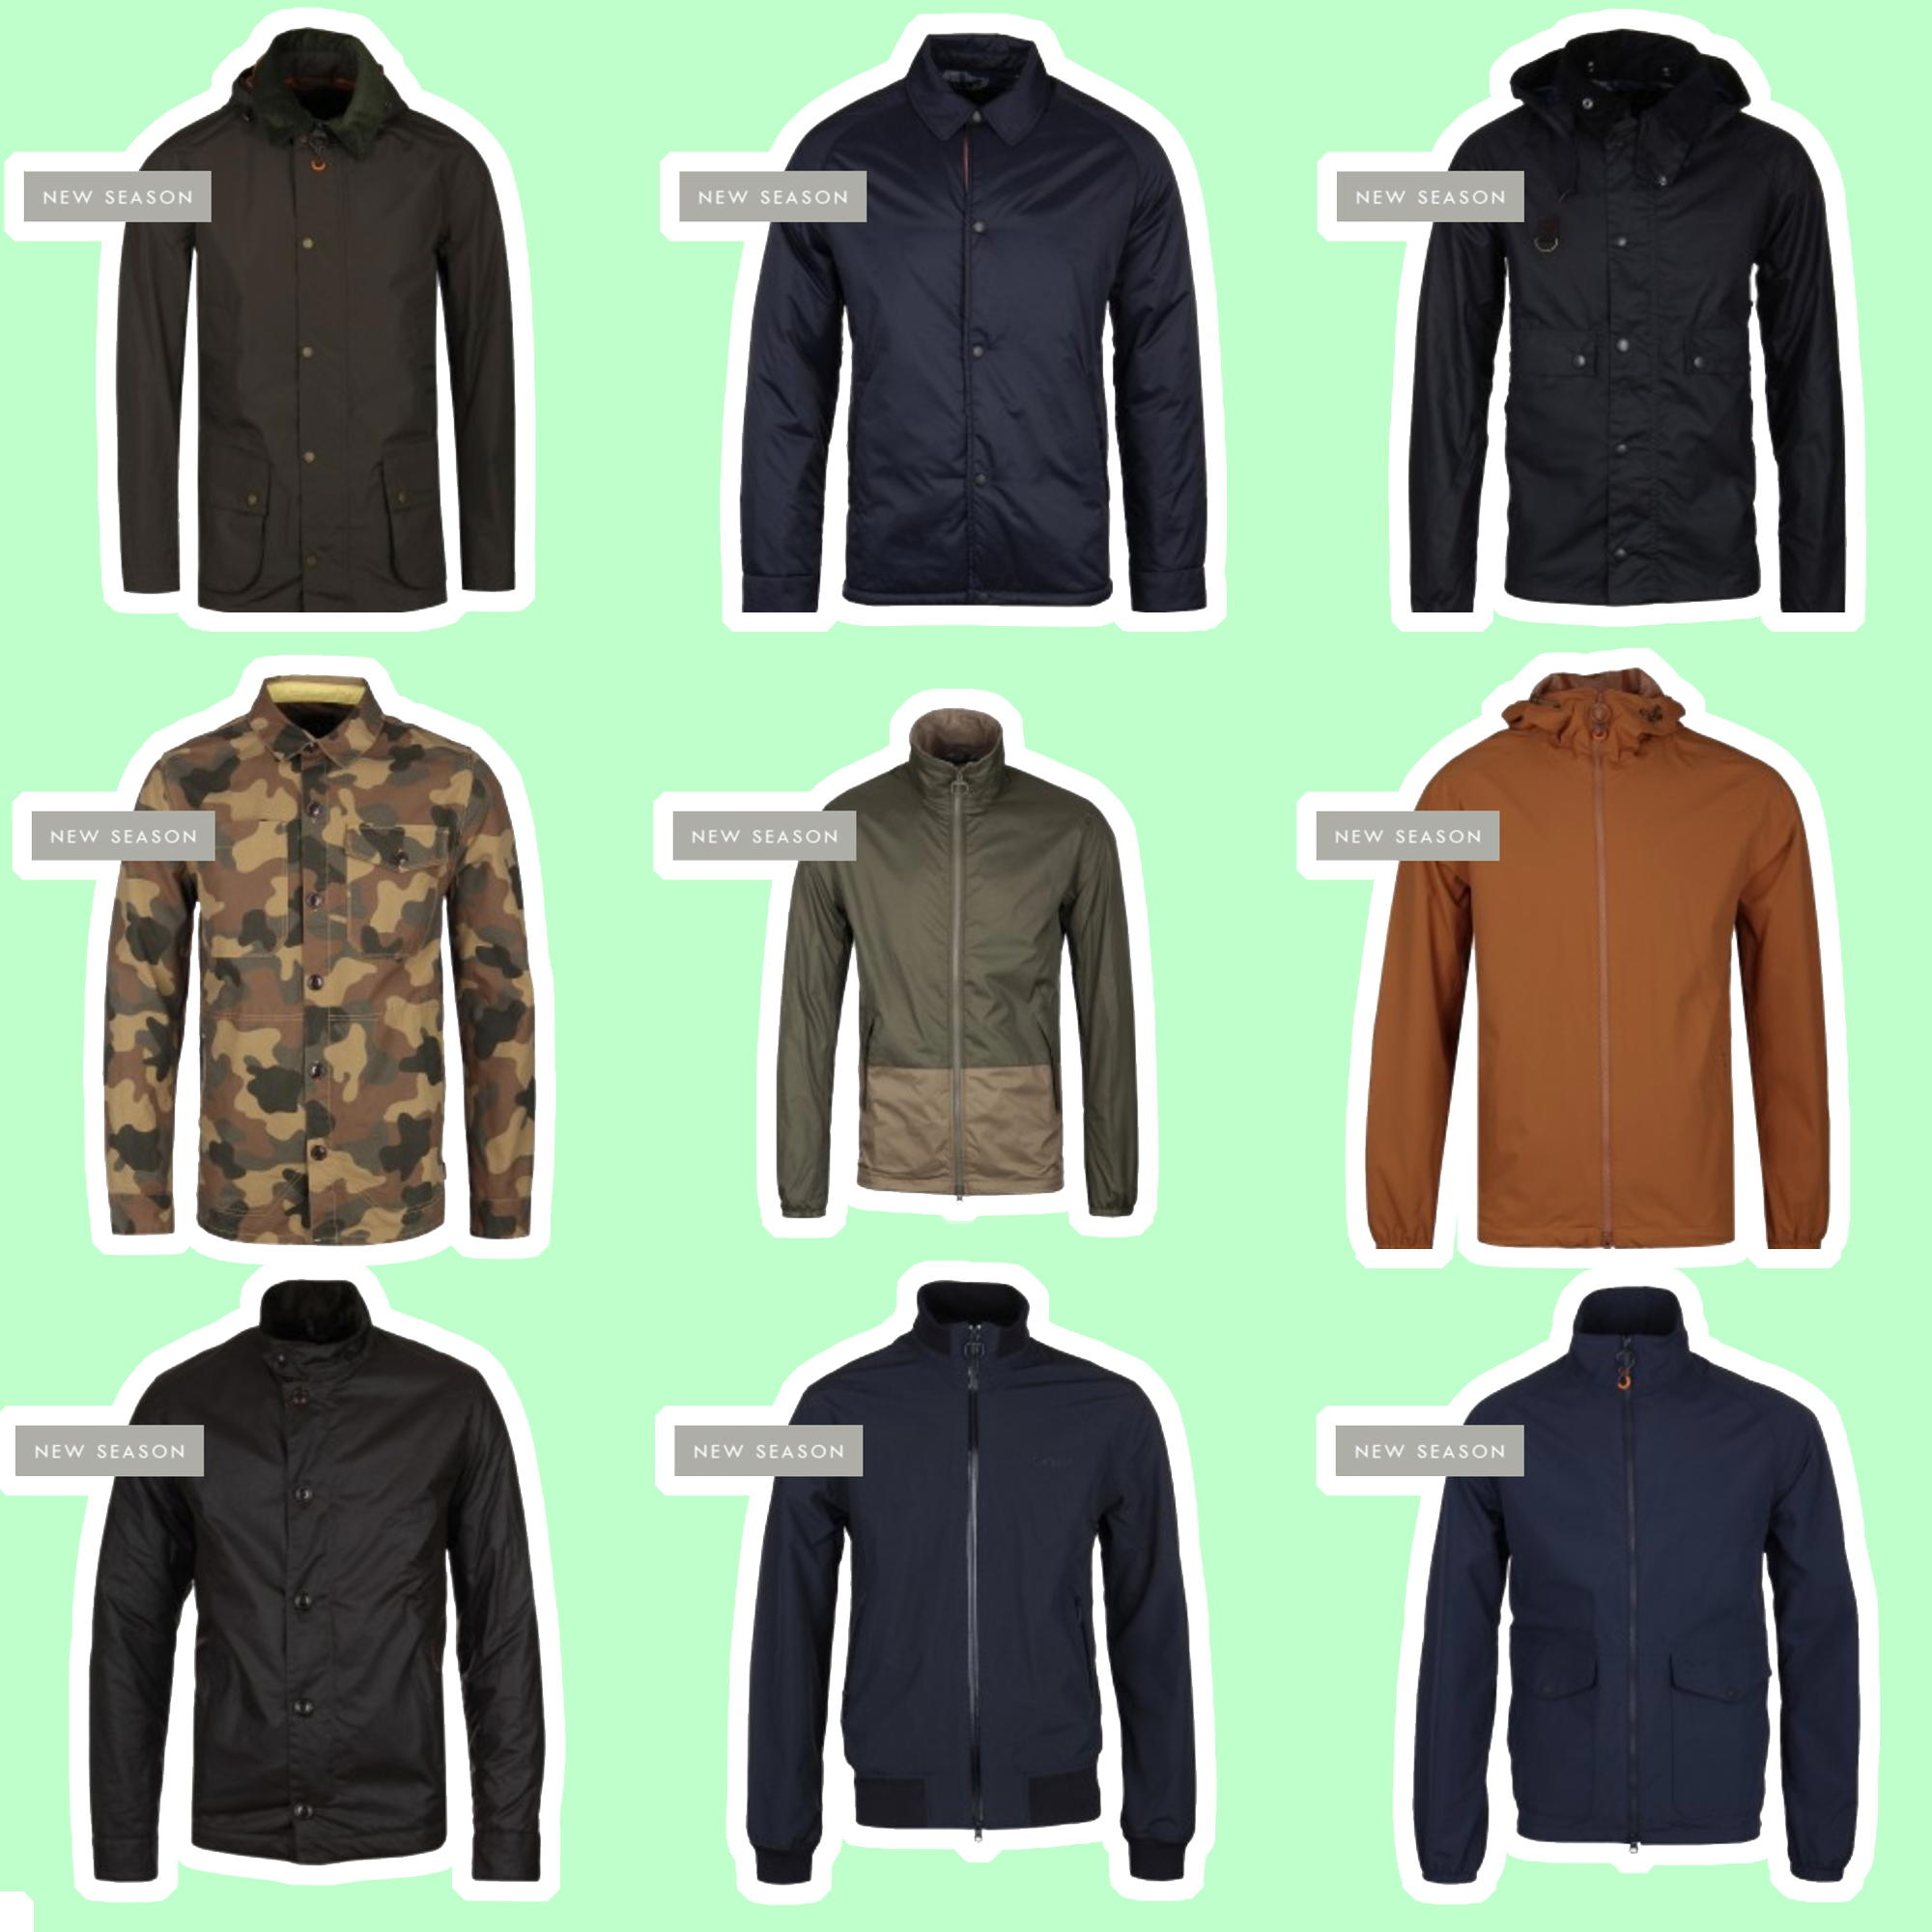 This Season’s Barbour Jackets Are Too Fresh Not To Own | Fupping